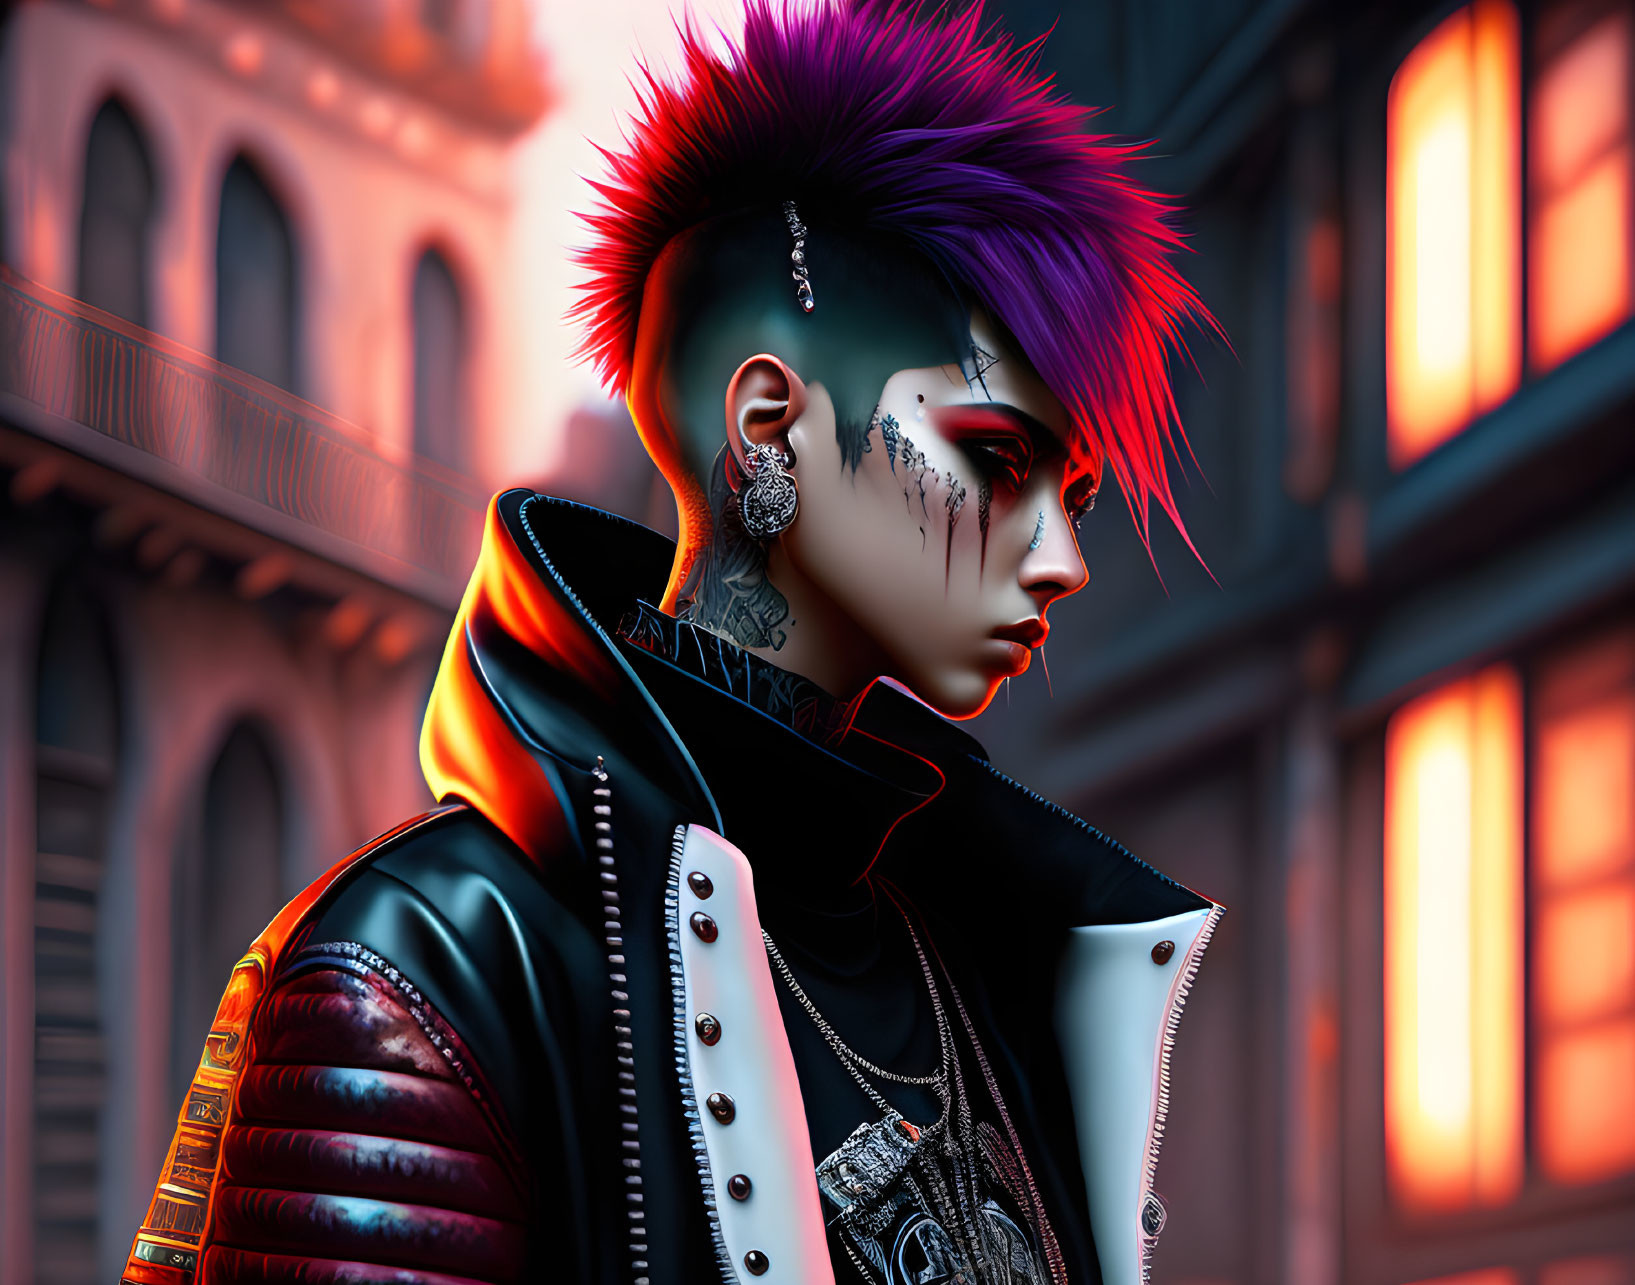 Colorful cyberpunk character with mohawk, piercings, tattoos in neon-lit city